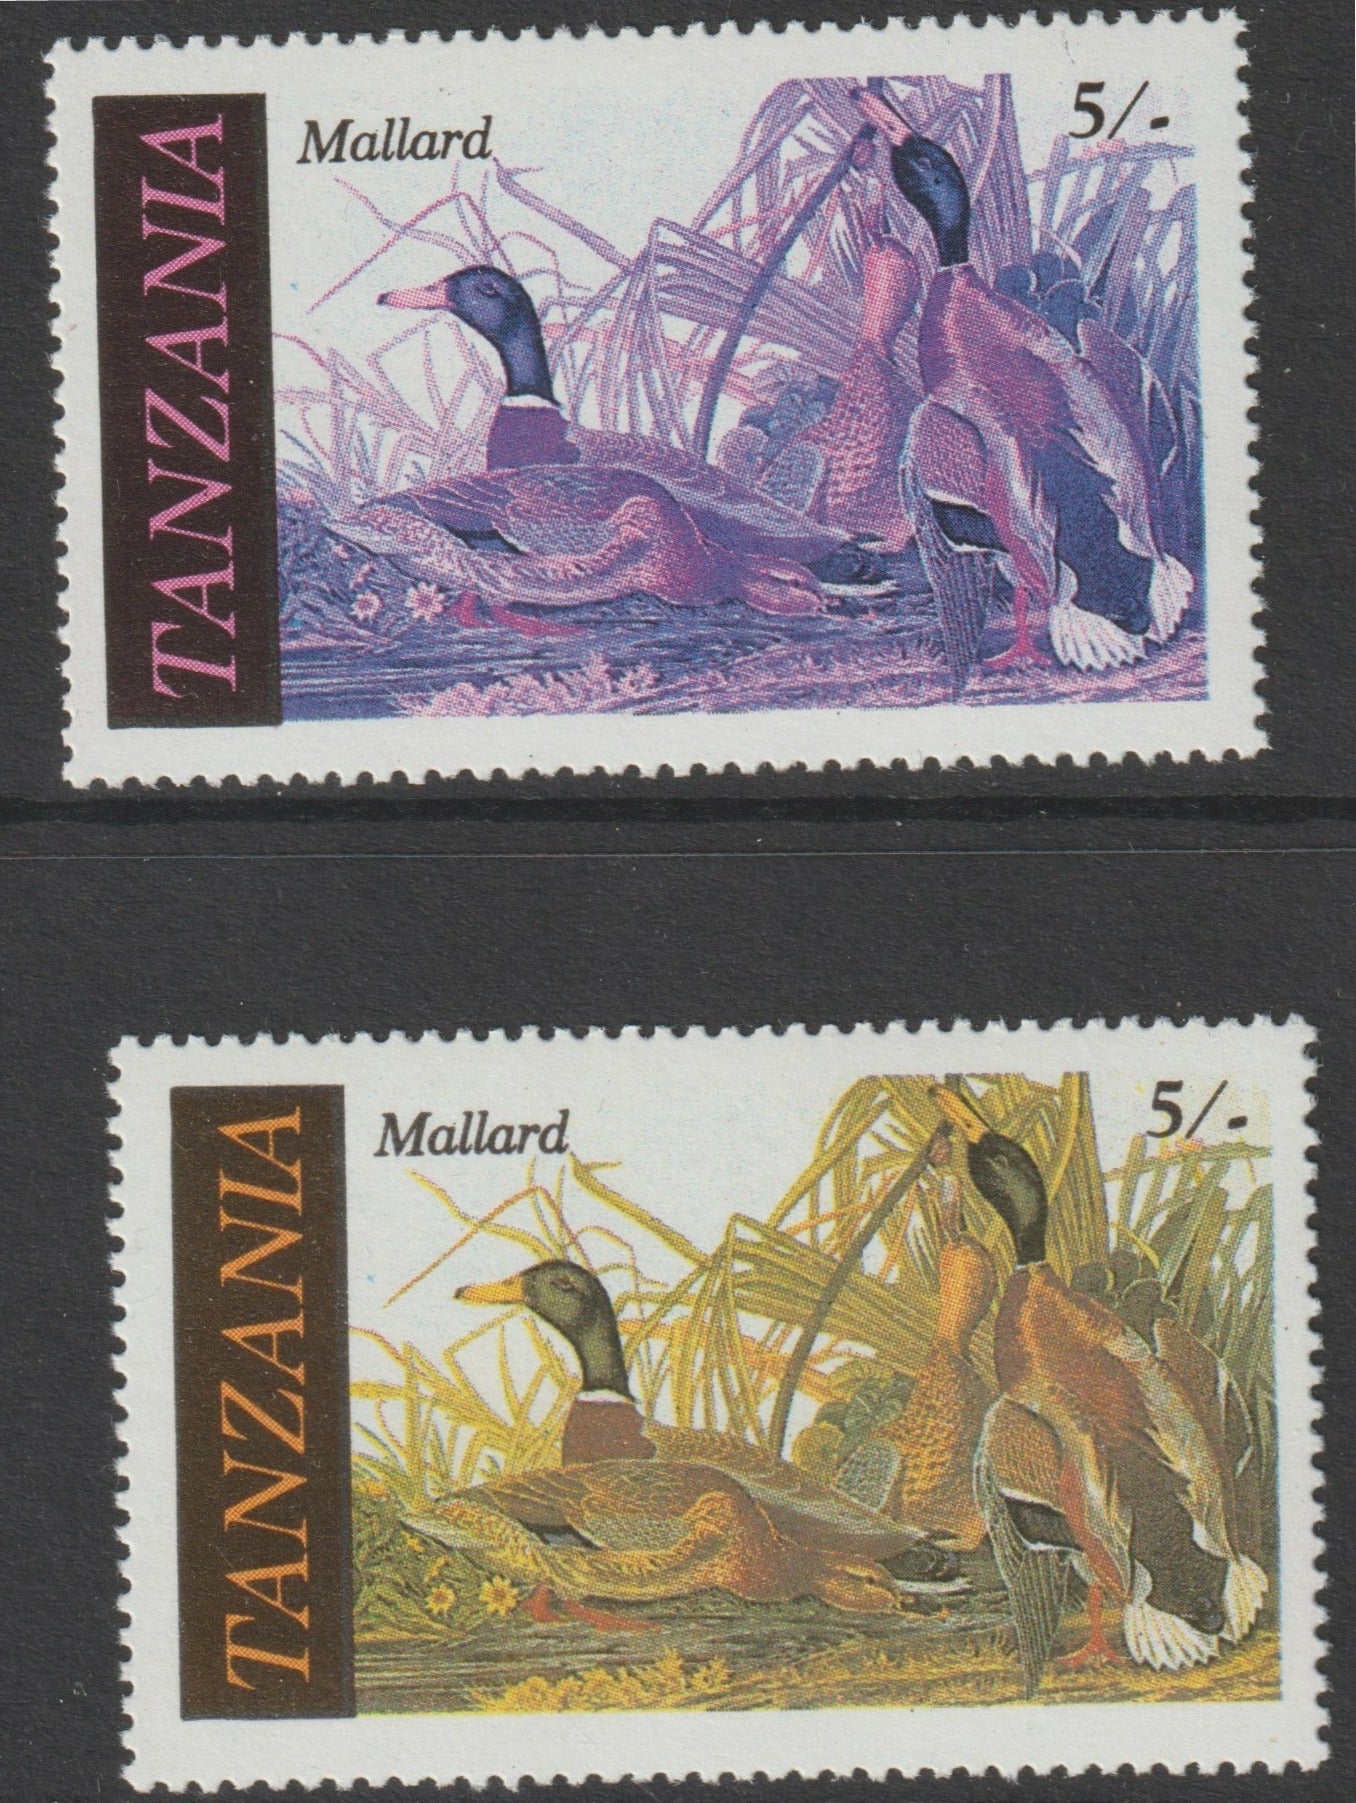 Tanzania 1986 John Audubon Birds 5s (Mallard) with yellow omitted, complete sheetlet of 8 plus normal sheet, both unmounted mint (as SG 464)